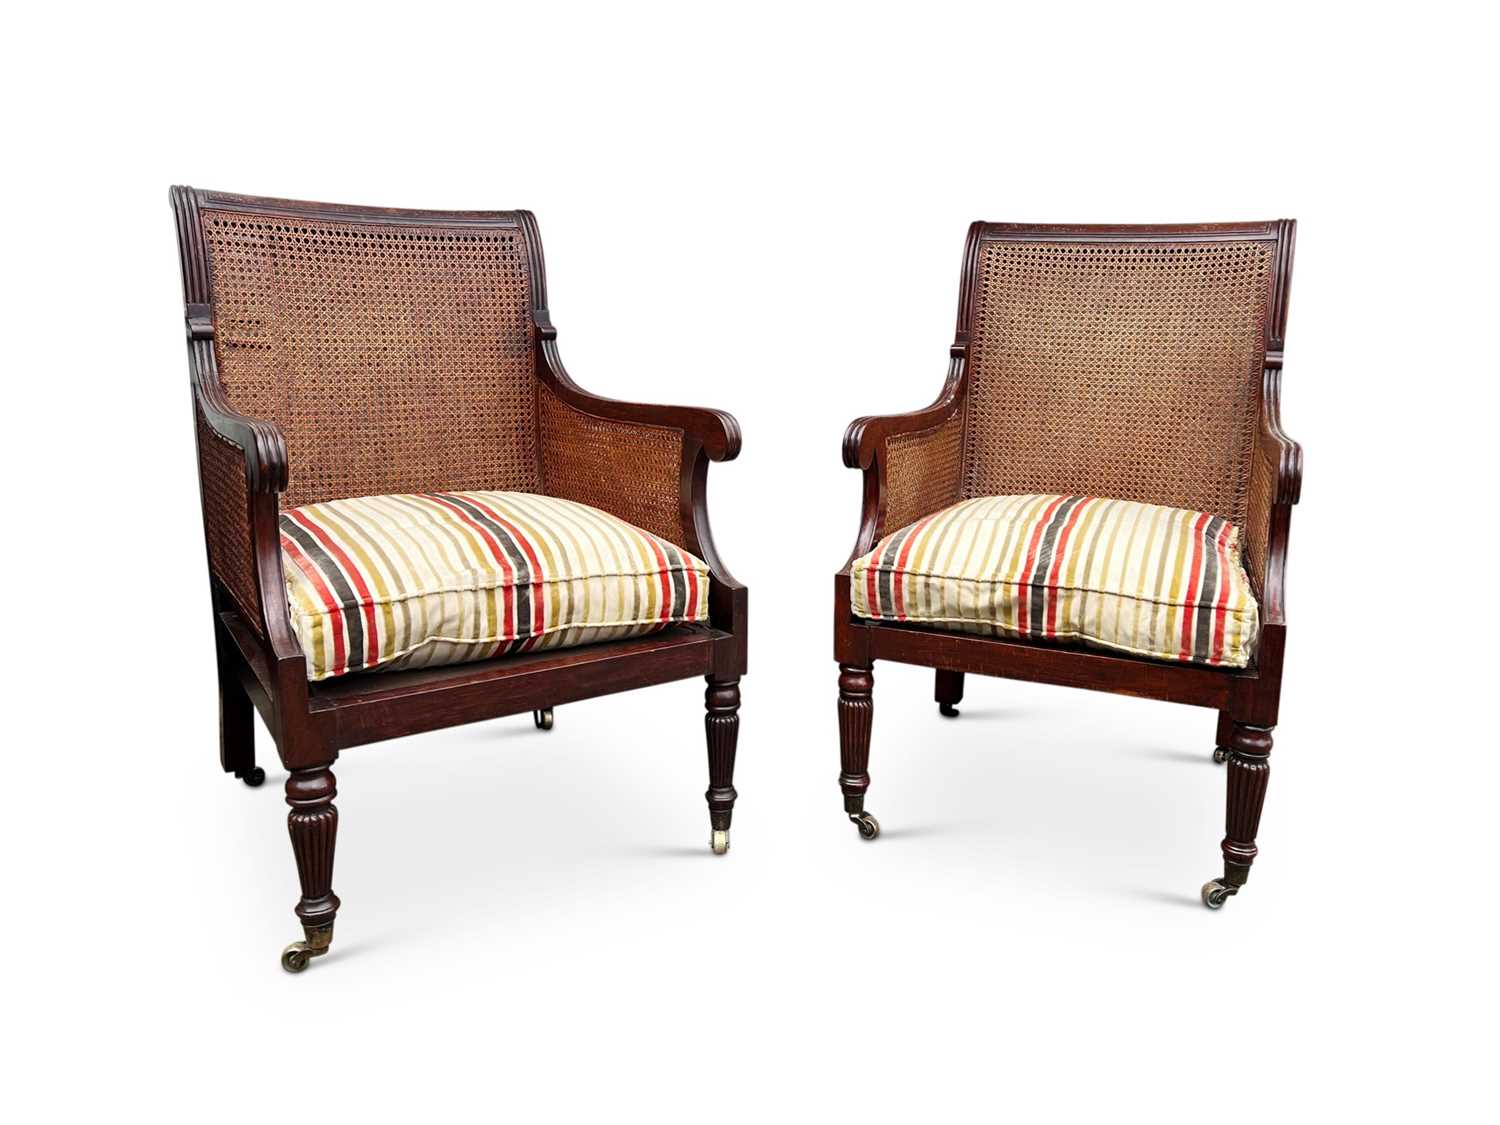 A PAIR OF EARLY 20TH CENTURY CANED BERGERE OR LIBRARY CHAIRS - Image 2 of 4